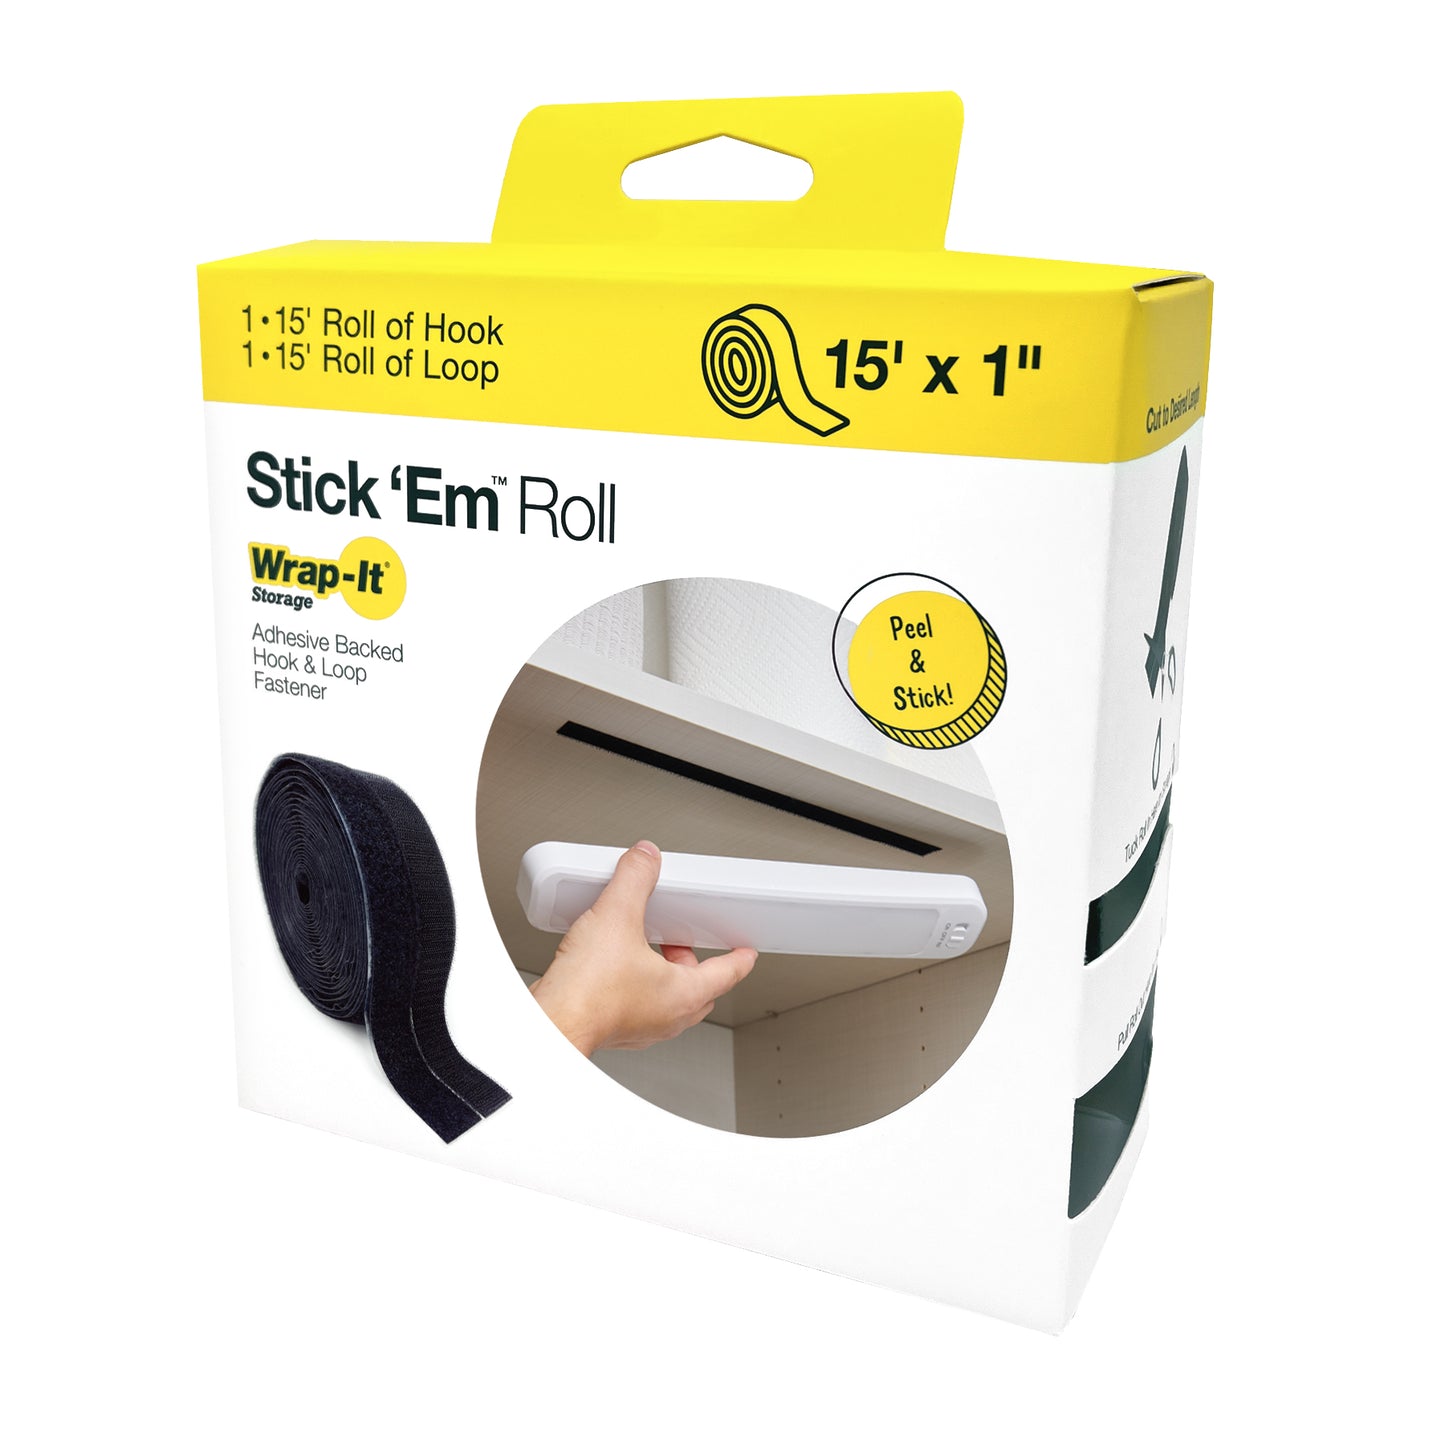 Stick 'Ems - 15' x 1" Adhesive Backed Roll